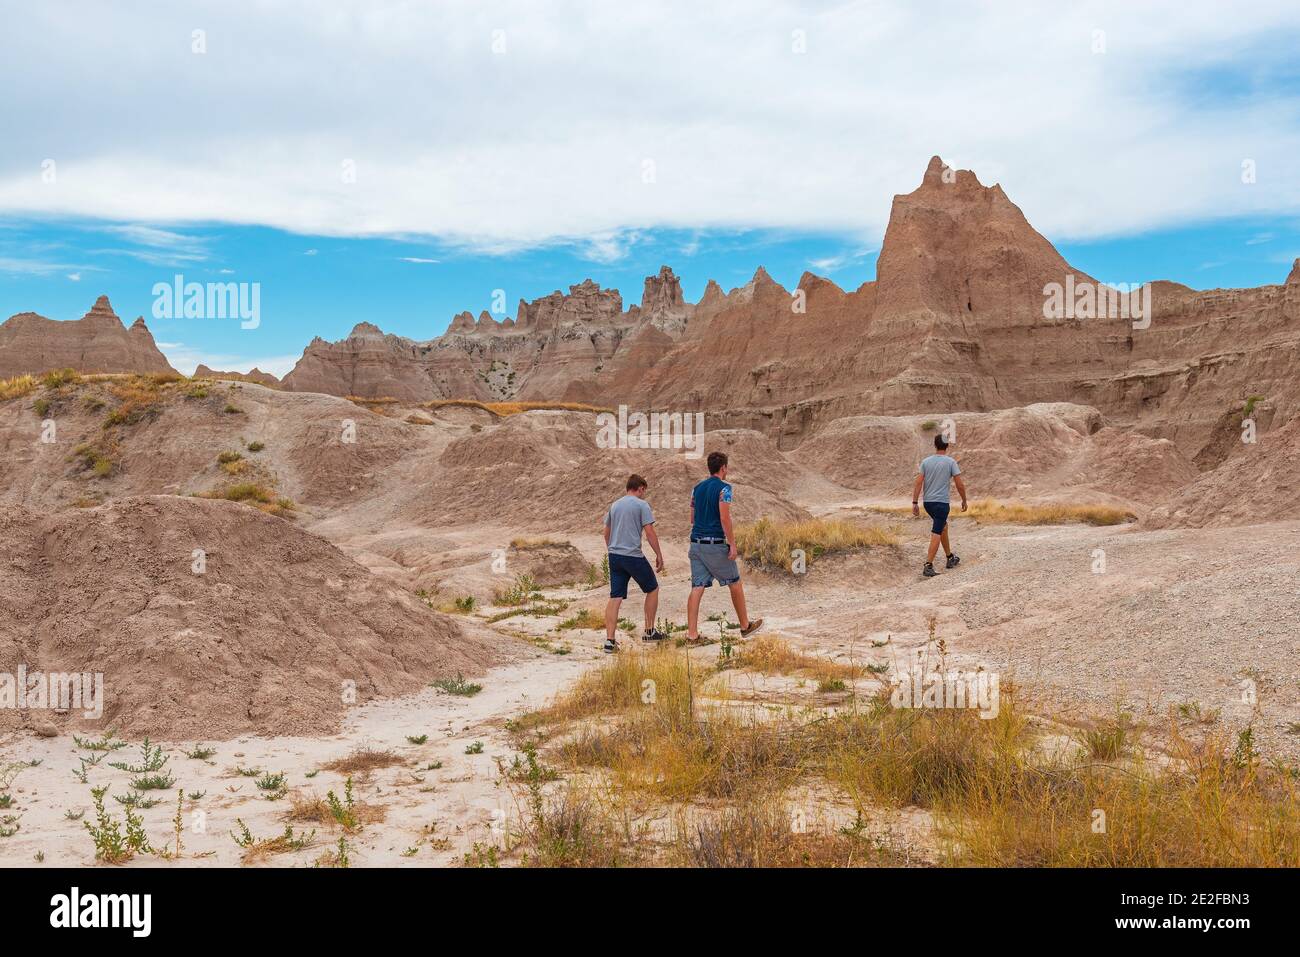 Unrecognizable young men hiking between the rock formations of Badlands national park, South Dakota, USA (United States of America). Stock Photo